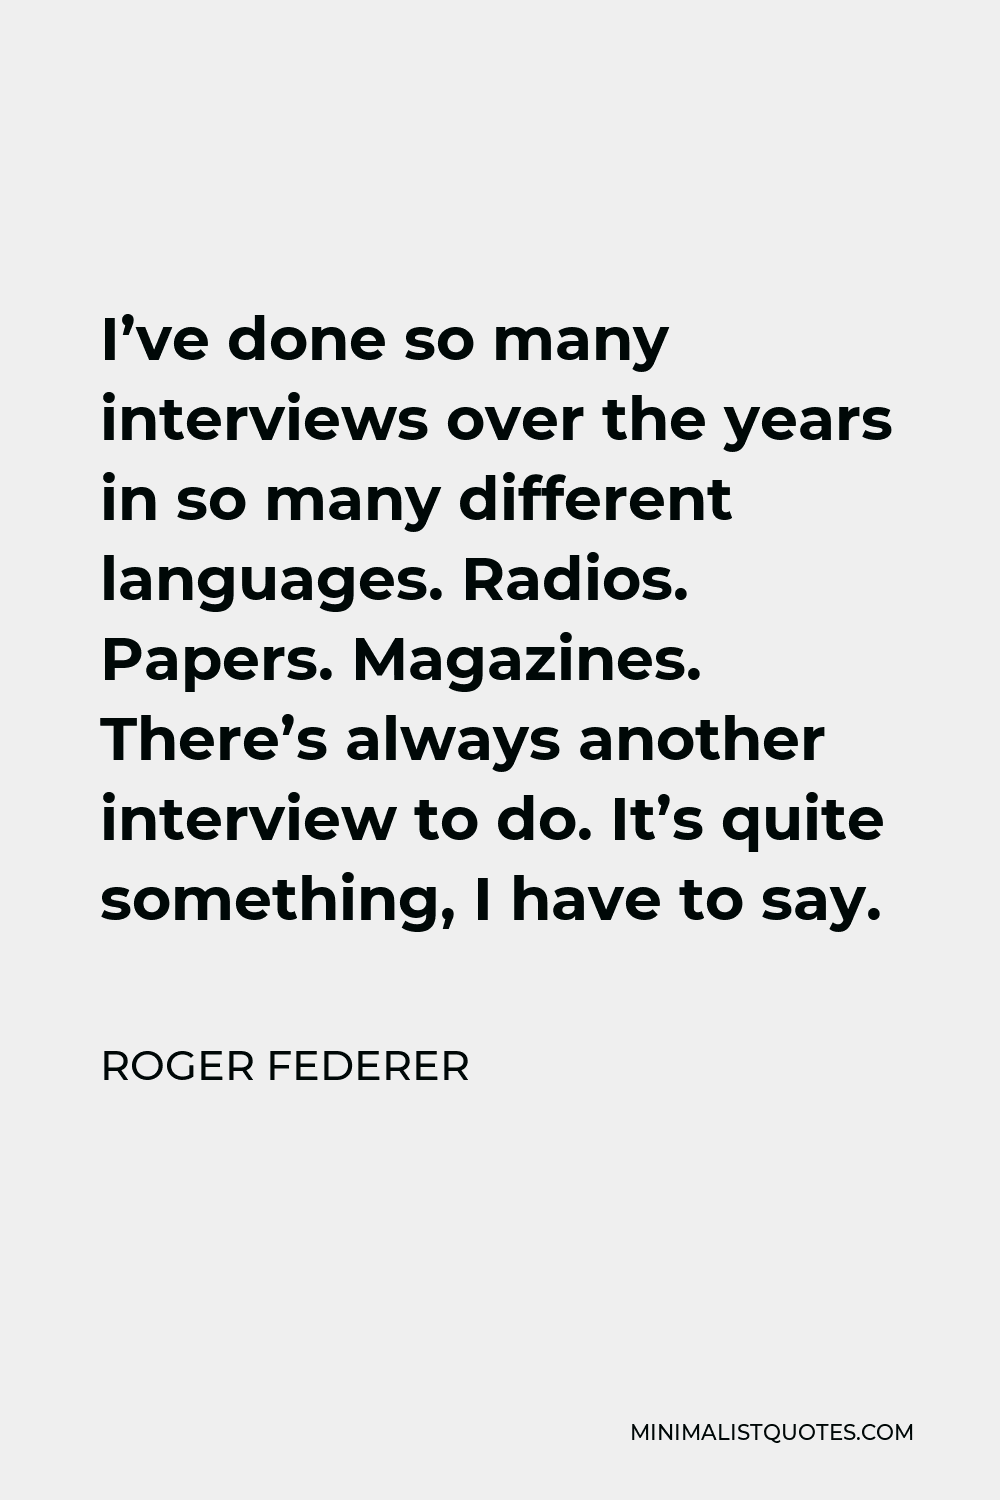 Roger Federer Quote - I’ve done so many interviews over the years in so many different languages. Radios. Papers. Magazines. There’s always another interview to do. It’s quite something, I have to say.